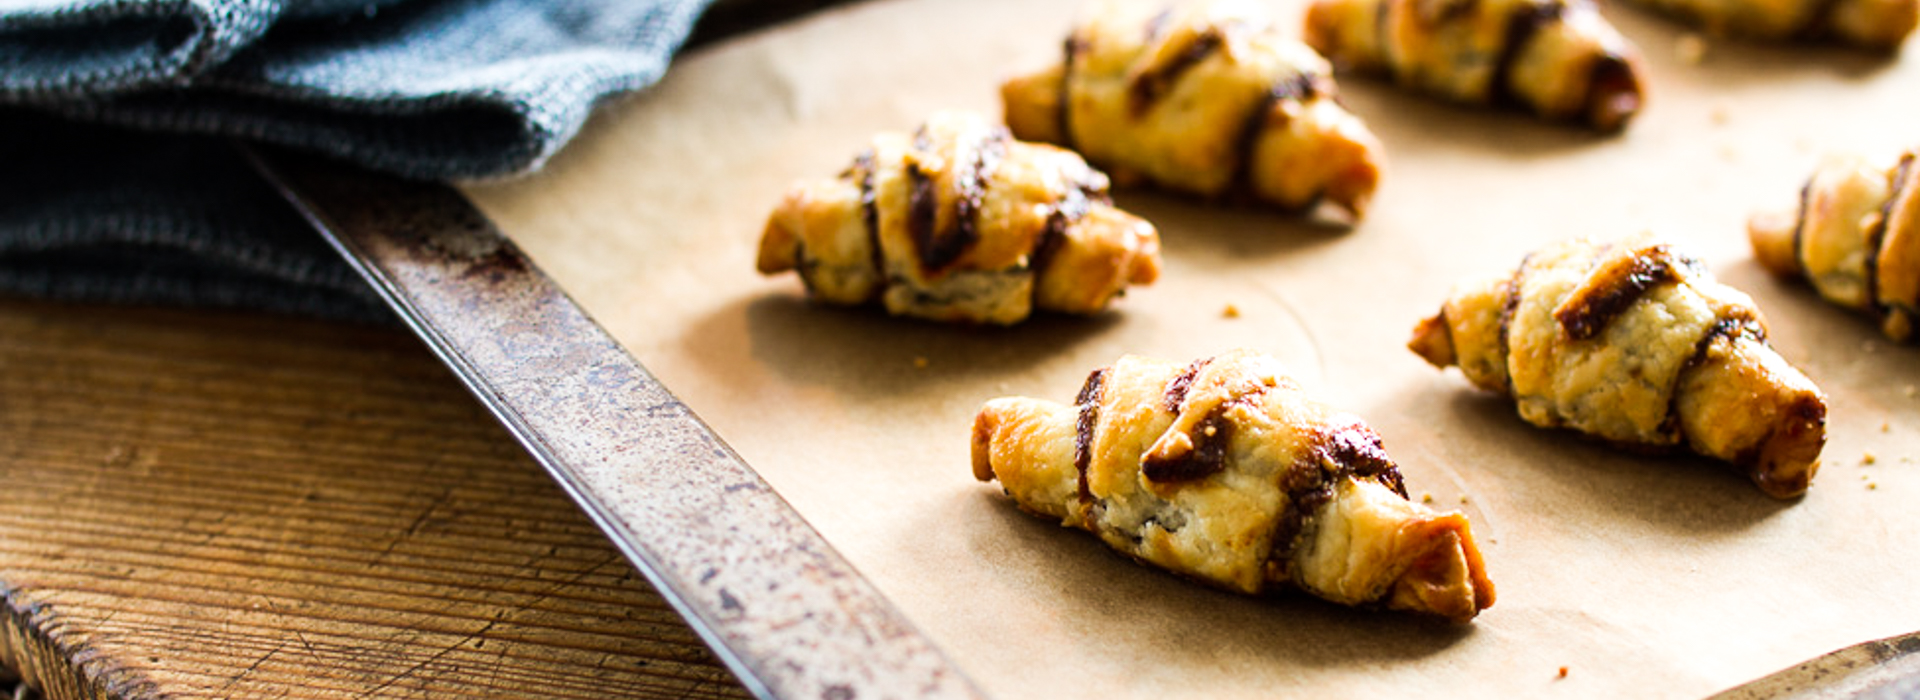 Rugelach can be filled with everything from chocolate to apricot jam, but prune is among the most classic filling choices, for good reason: the dried fruit counters the tanginess from the cream cheese in the pastry dough